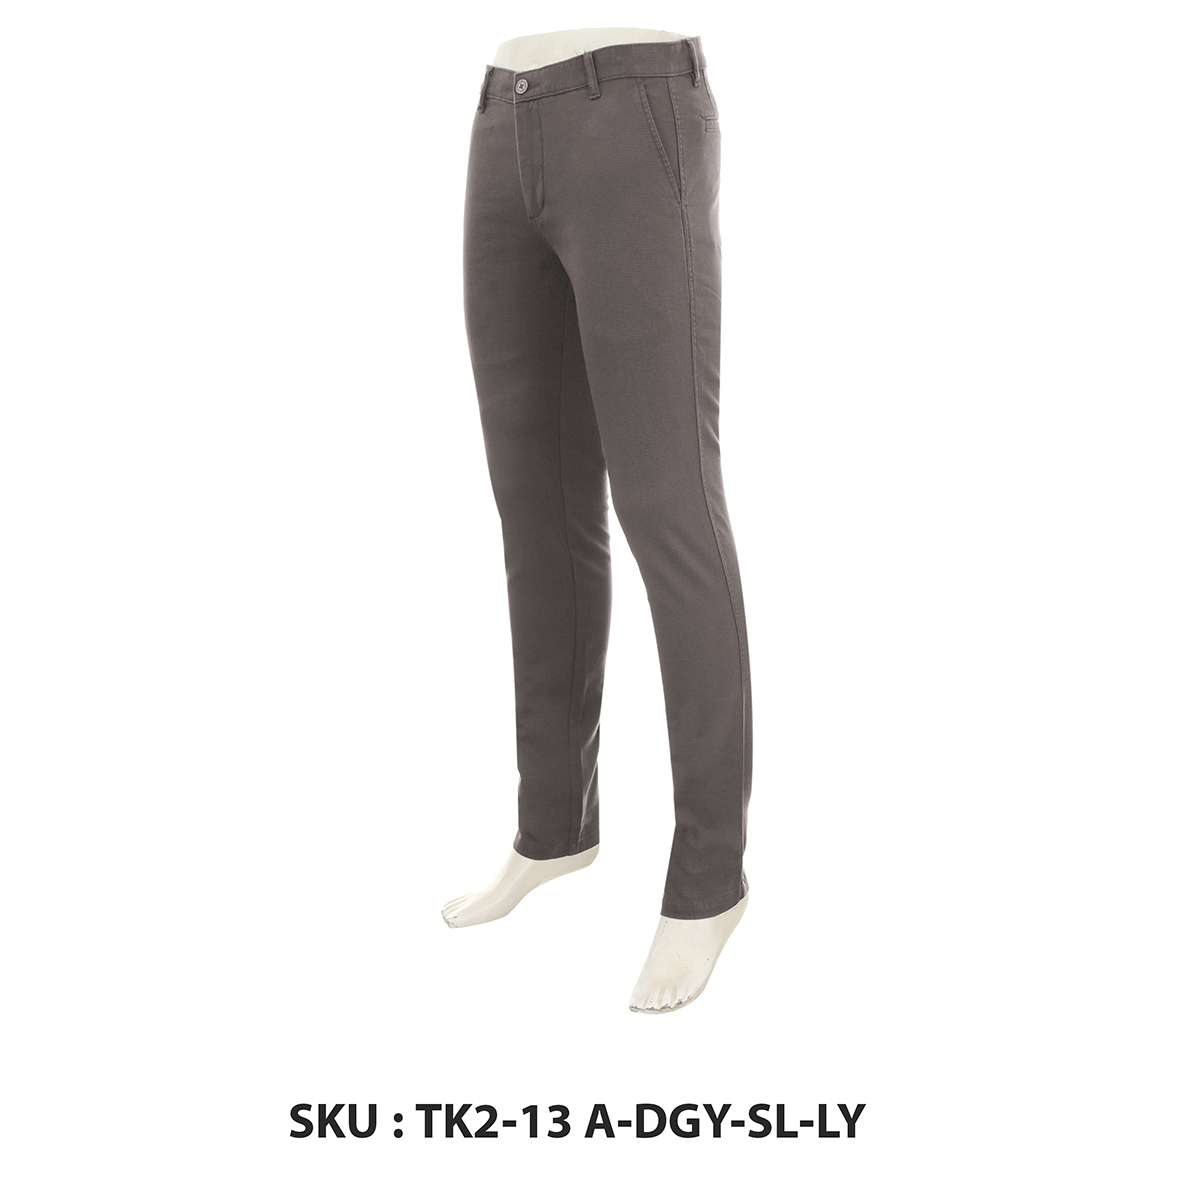 Classic Polo Mens Trousers Tk2-13 A-Dgy-Sl-Ly Grey 36